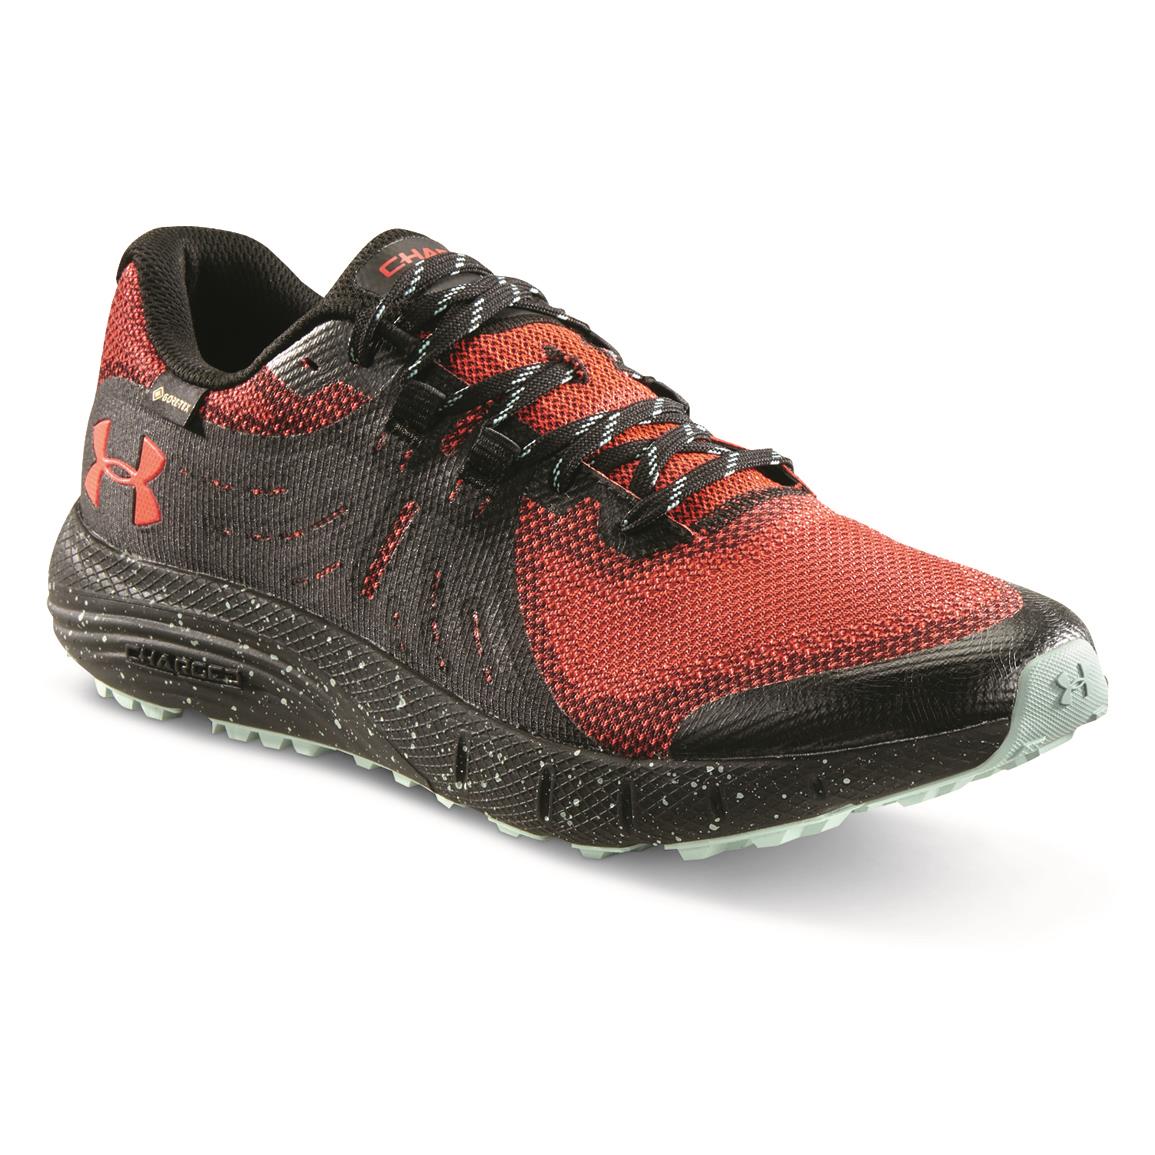 Under Armour Men's Charged Bandit GTX Waterproof Trail Running Shoes ...